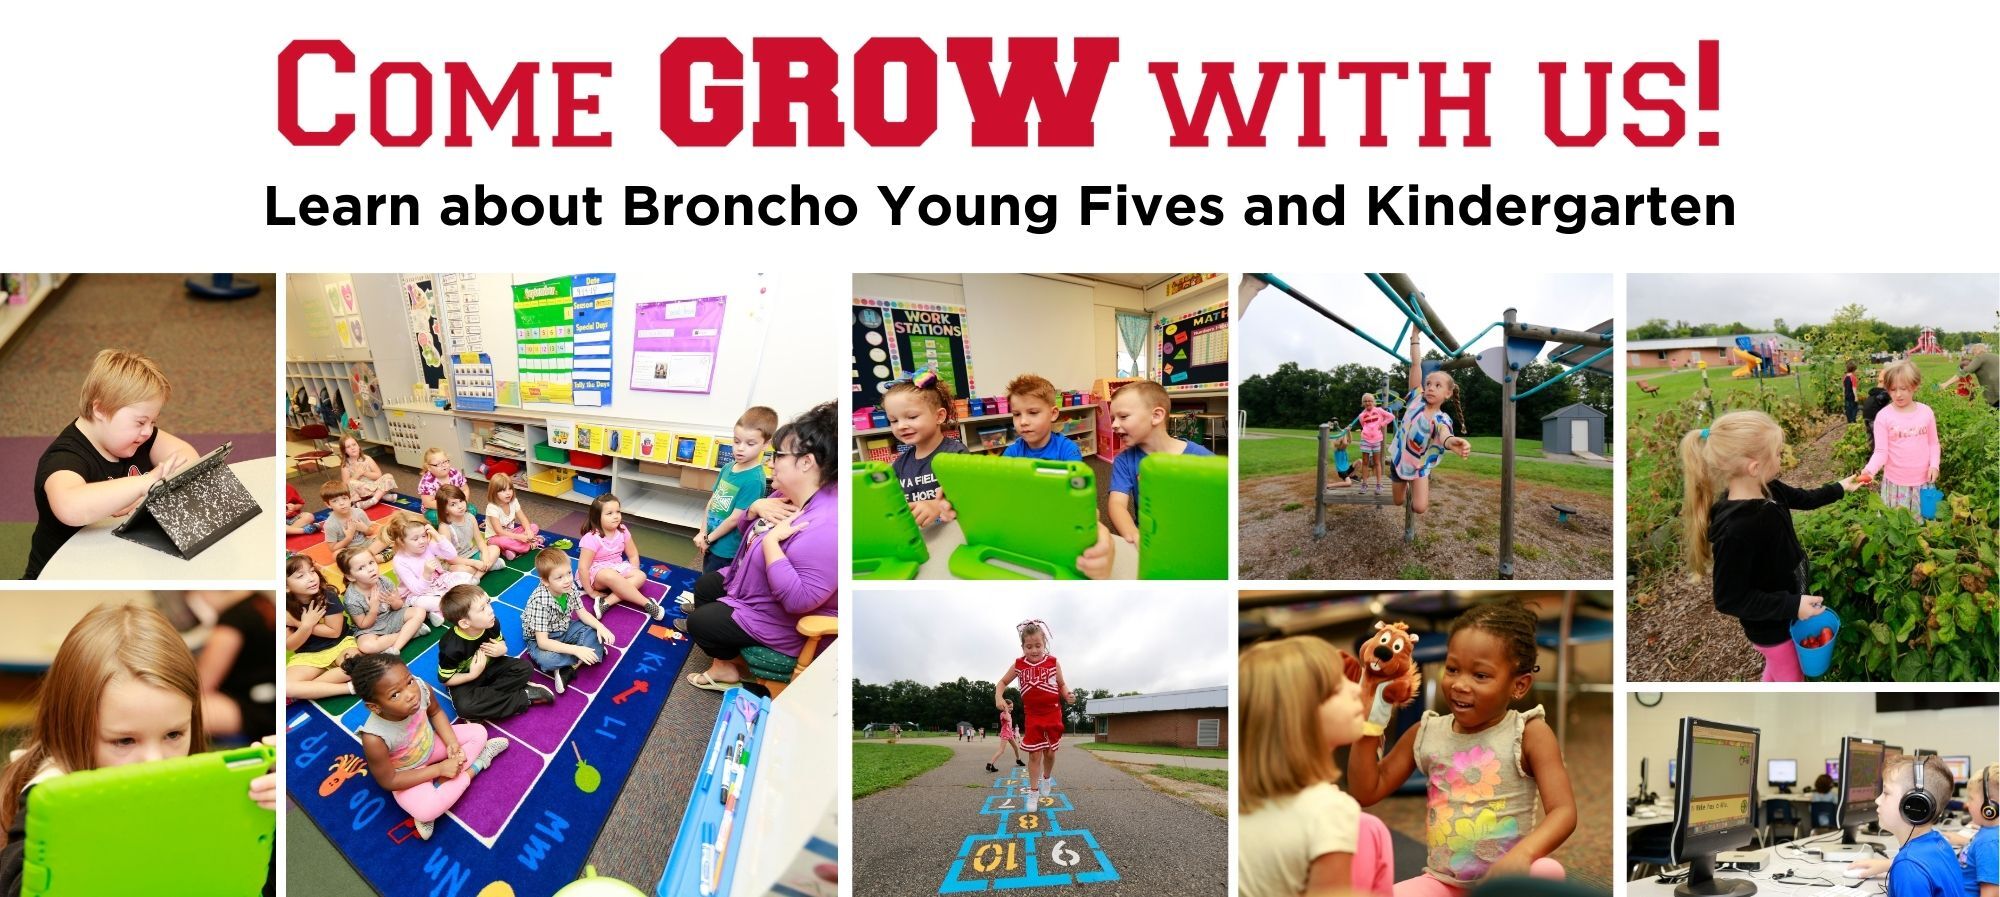 Come grow with us - student collage with various student pictures